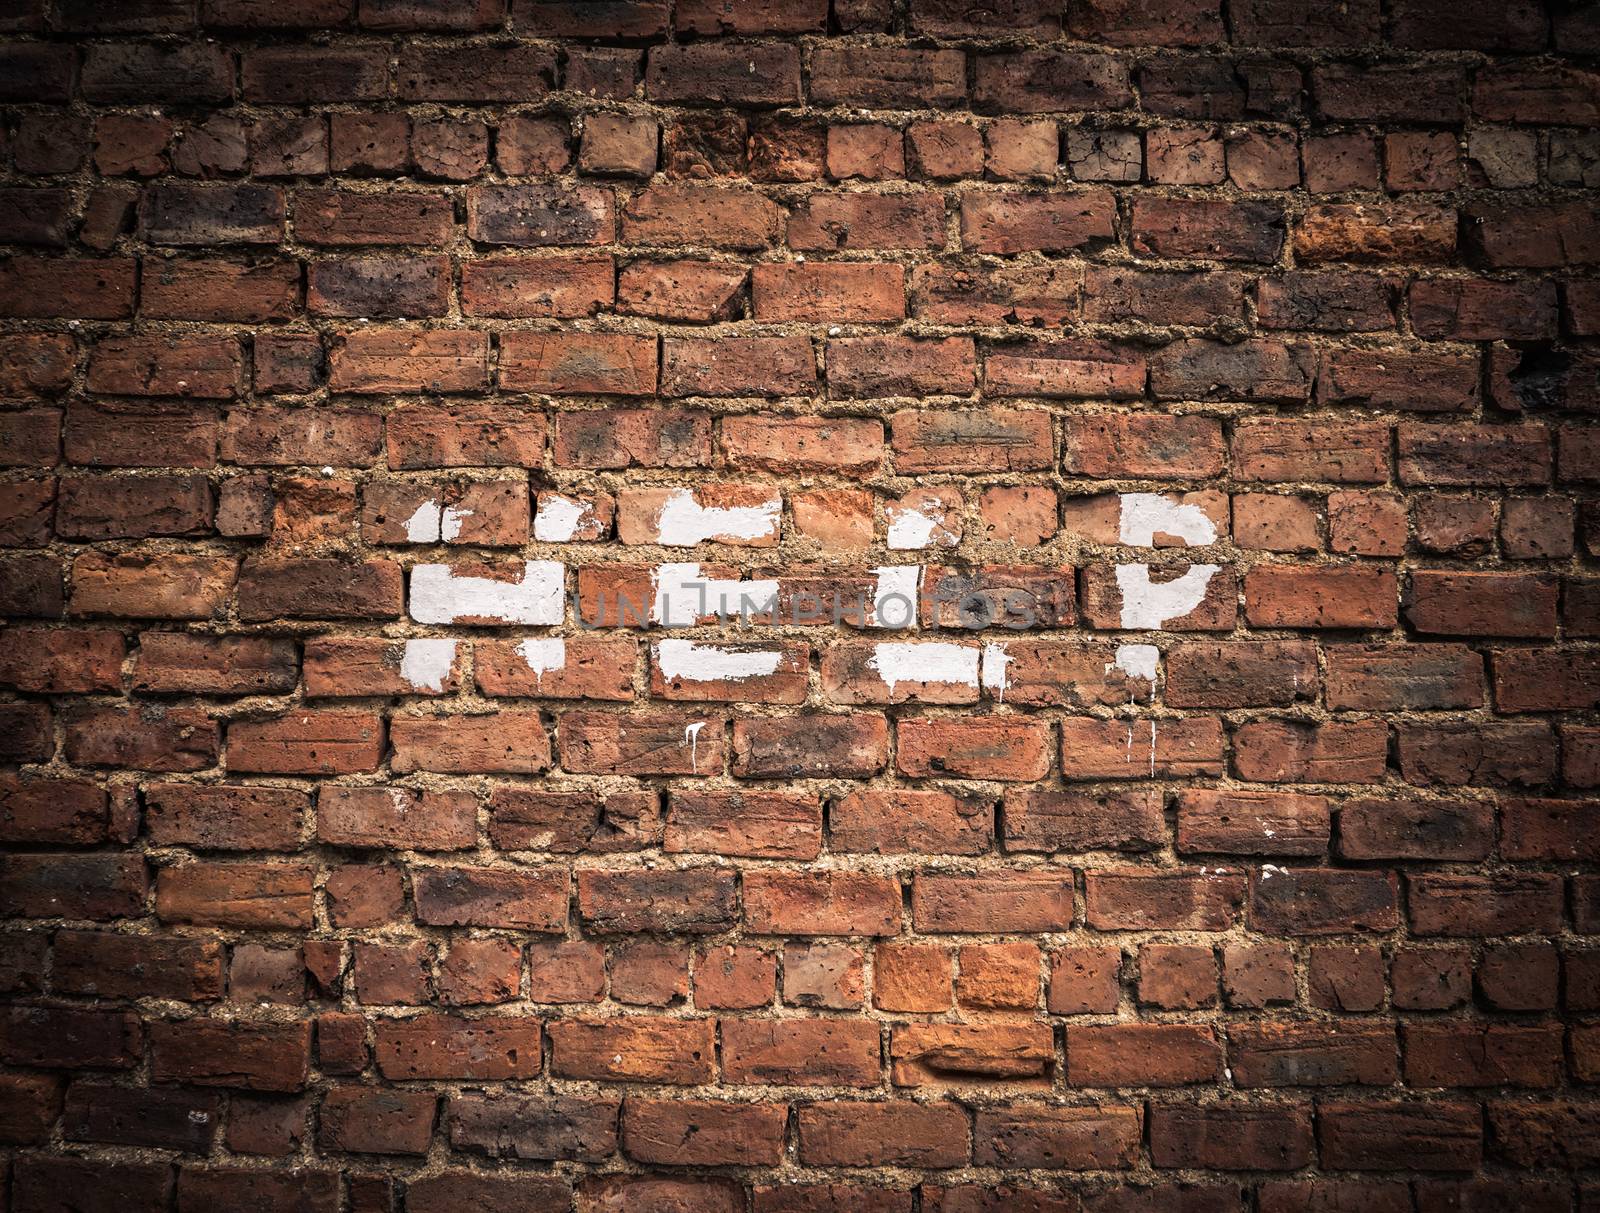 The Word Help Written As Graffiti On A Vintage Red Brick Wall